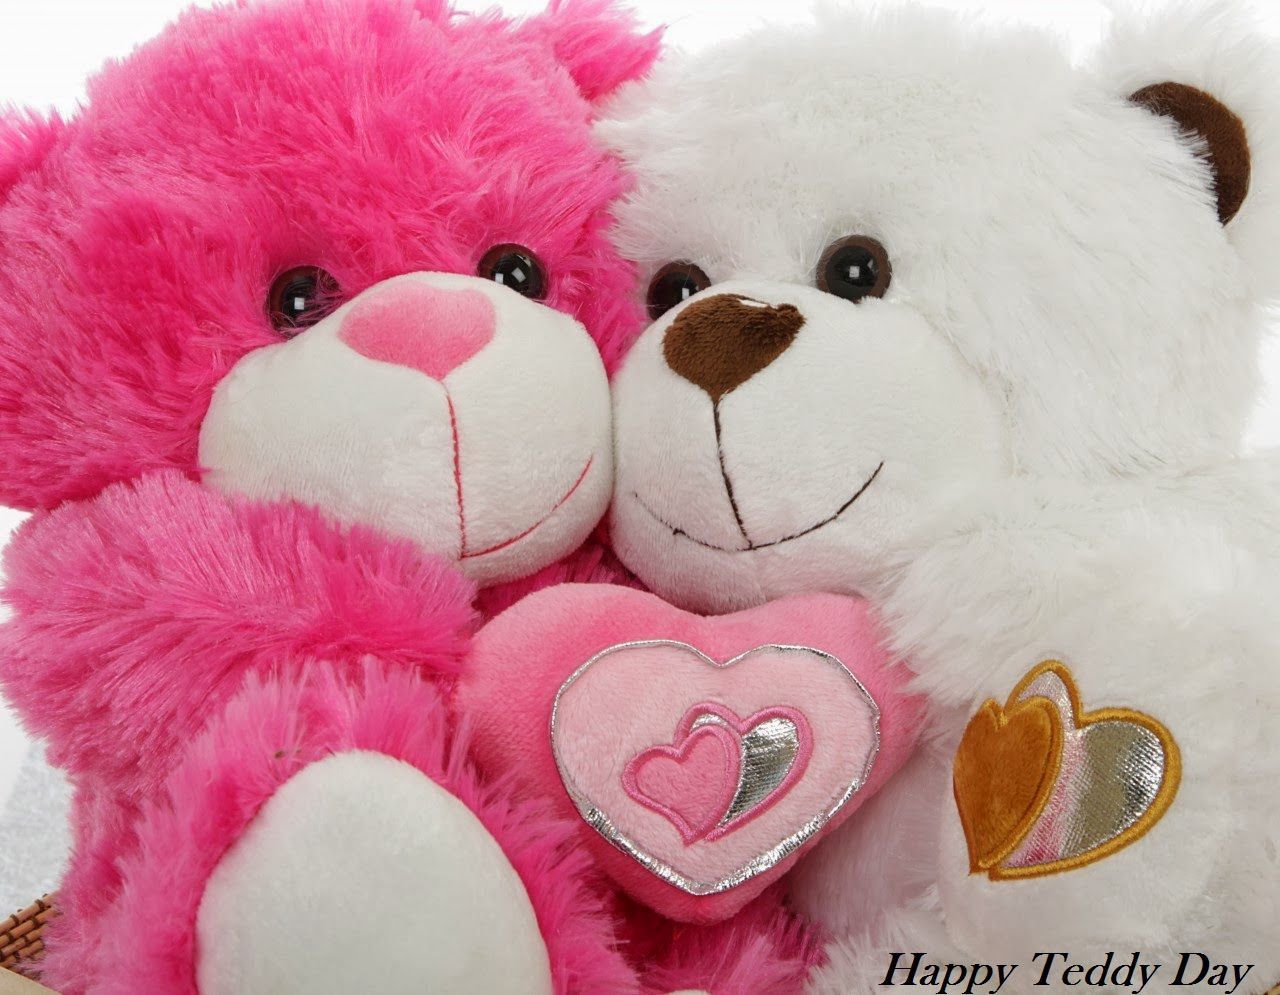 Happy Teddy Day Image Pictures HD Wallpaper For Best